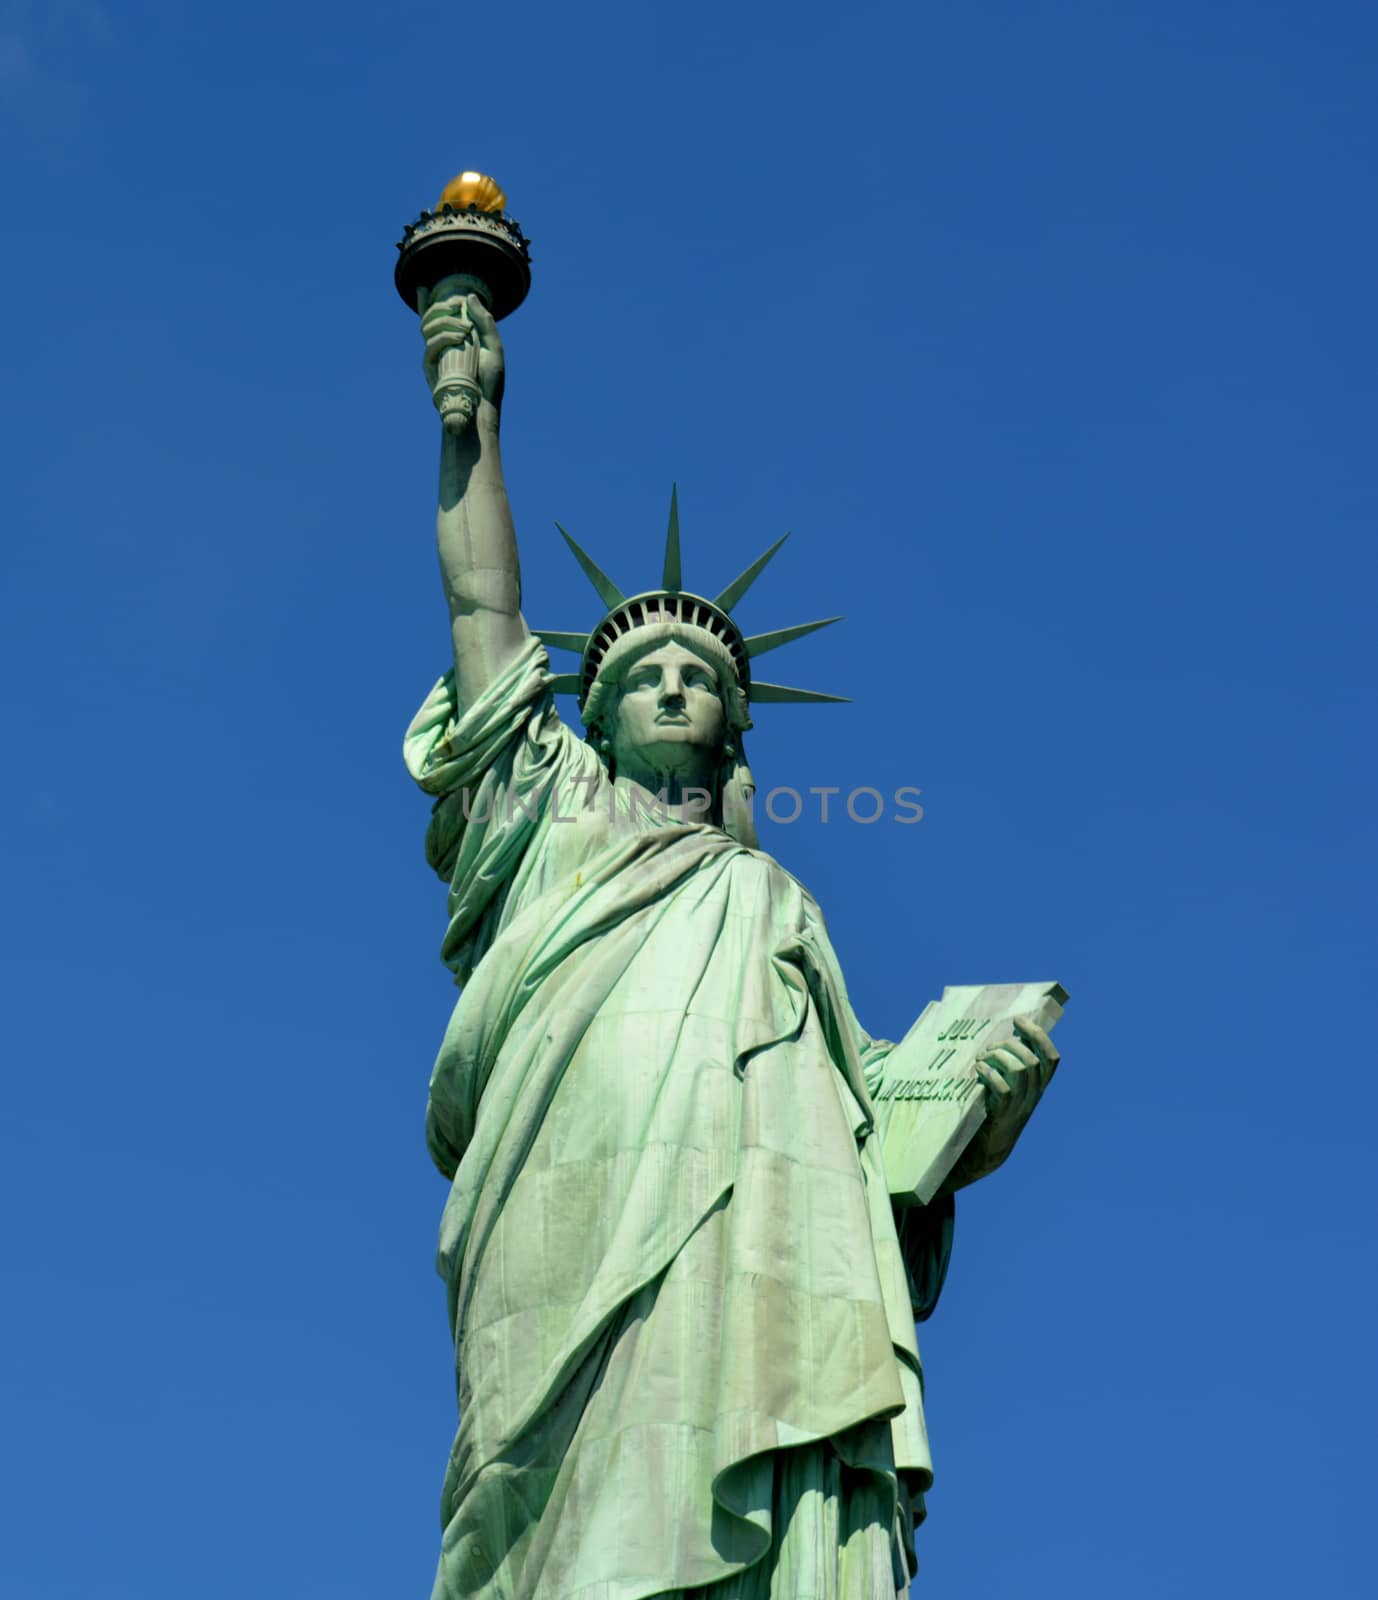 Statue of Liberty - New York City  - 08 by RefocusPhoto